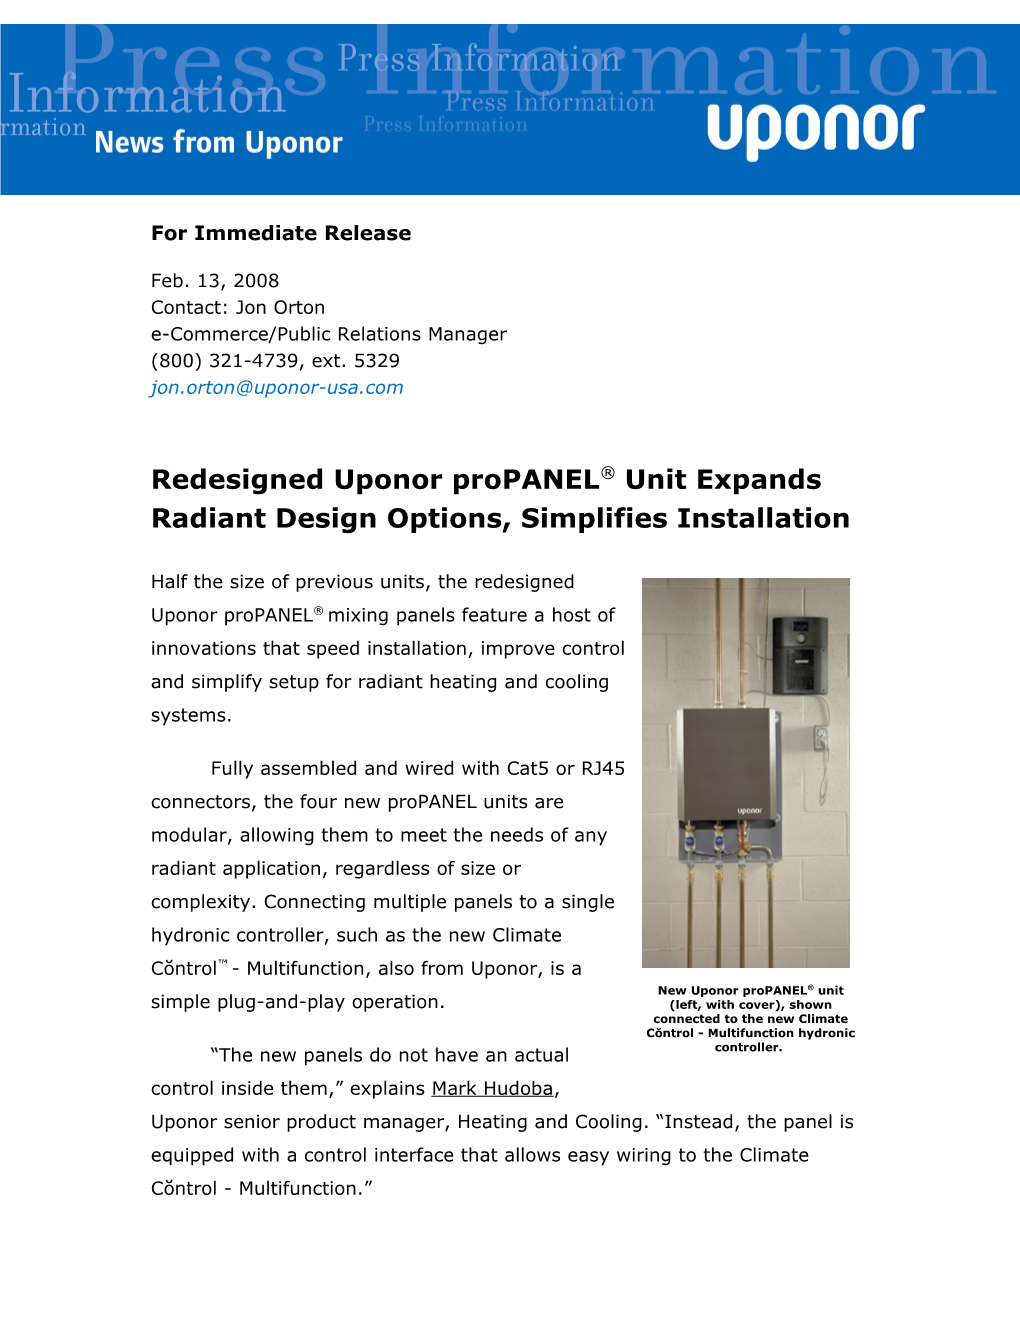 Uponor Redesigns Propanel Line